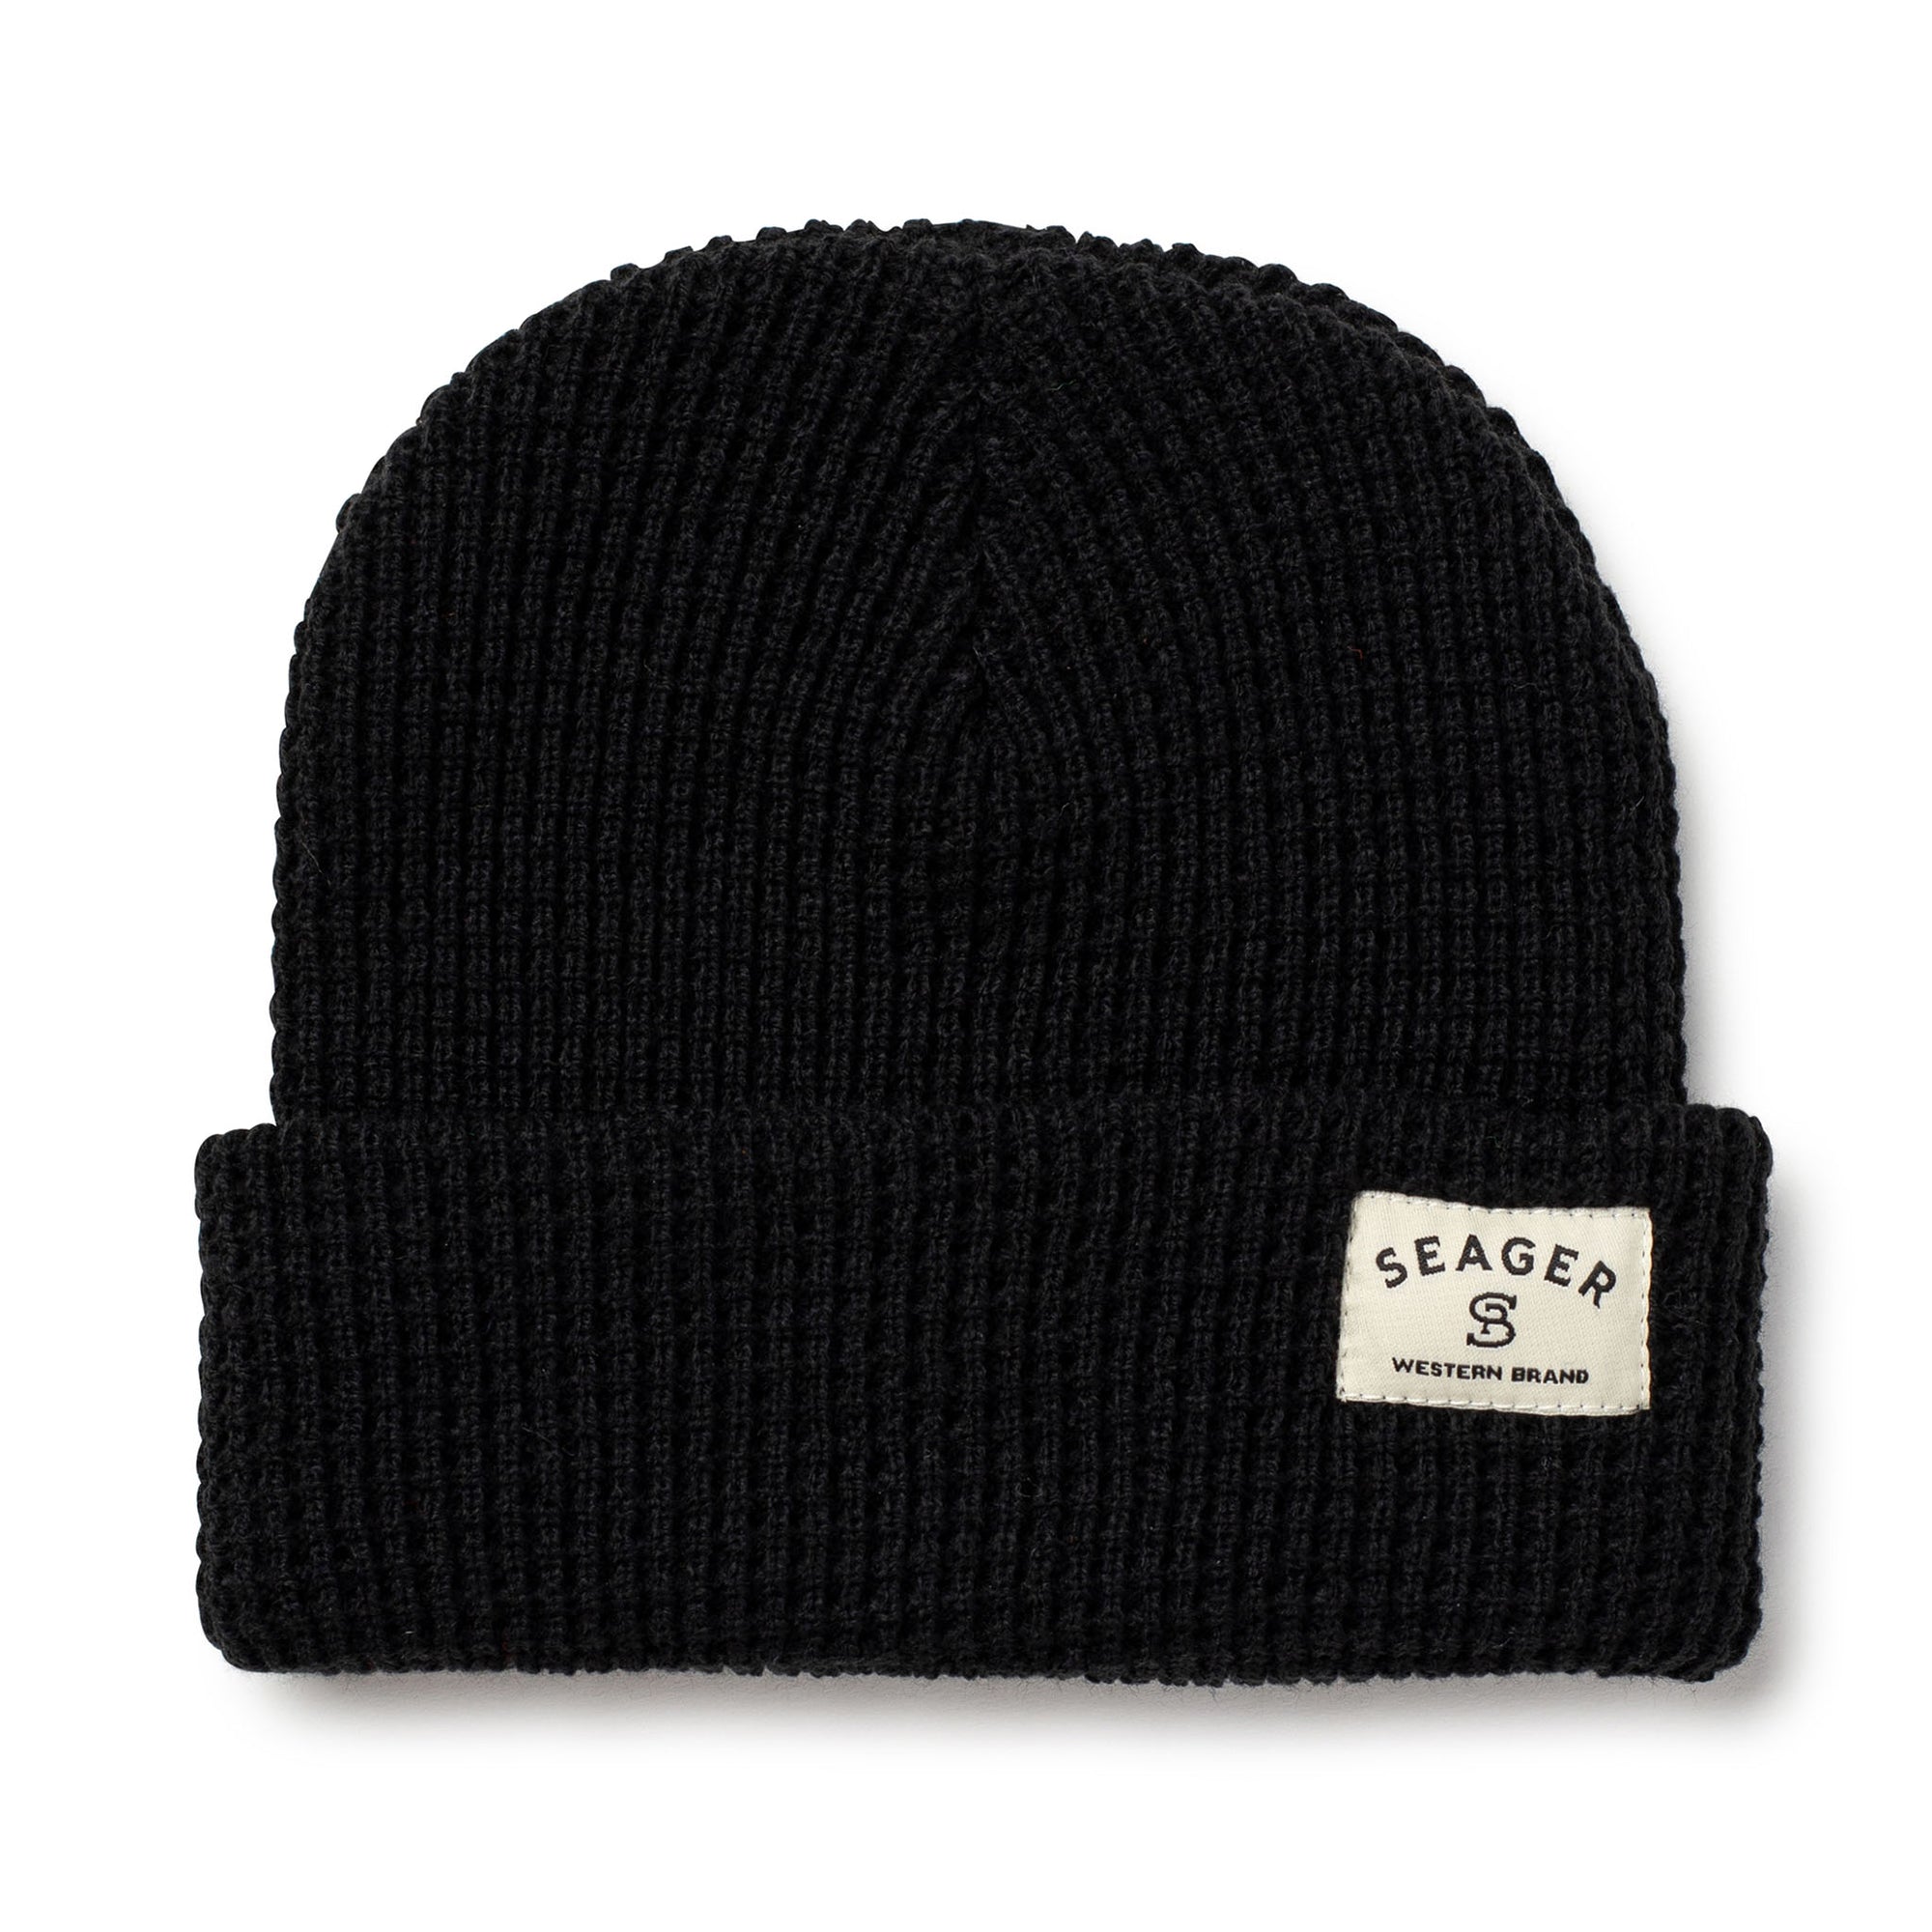 The Service Waffle-Knit Beanie 2.0